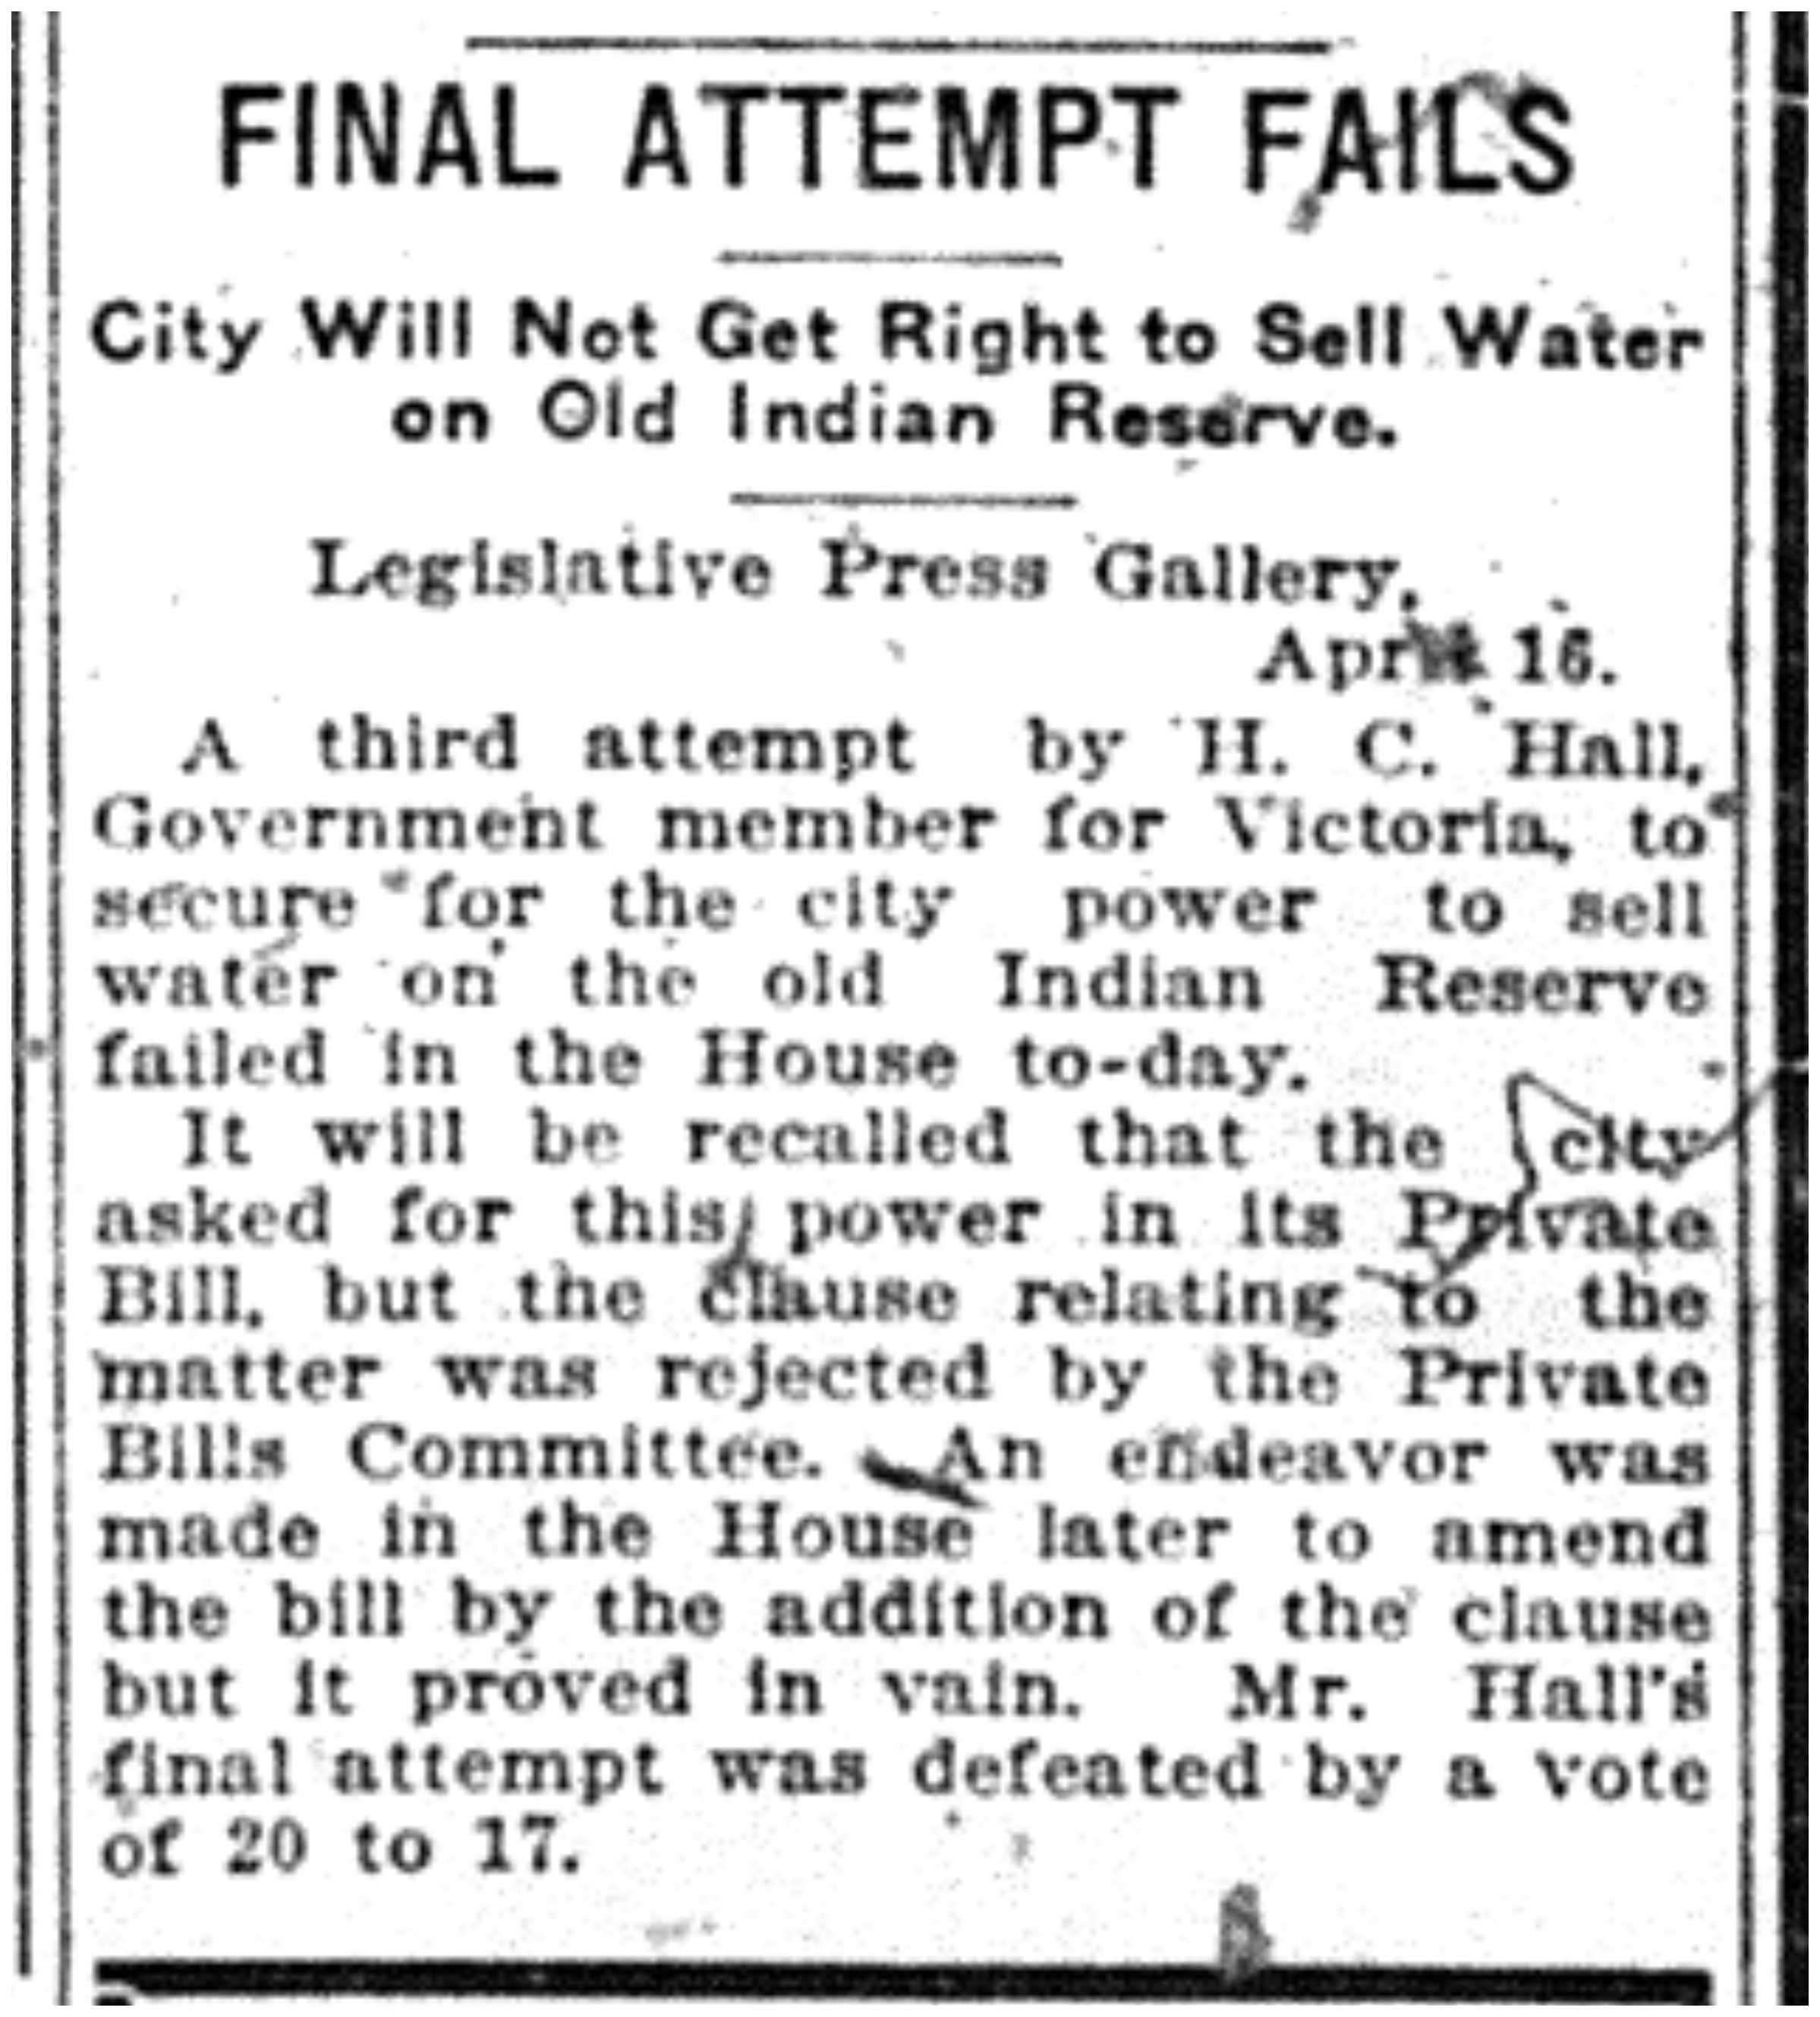 "Final Attempt Fails: City Will Not Get Right to Sell Water On Old Indian Reserve"